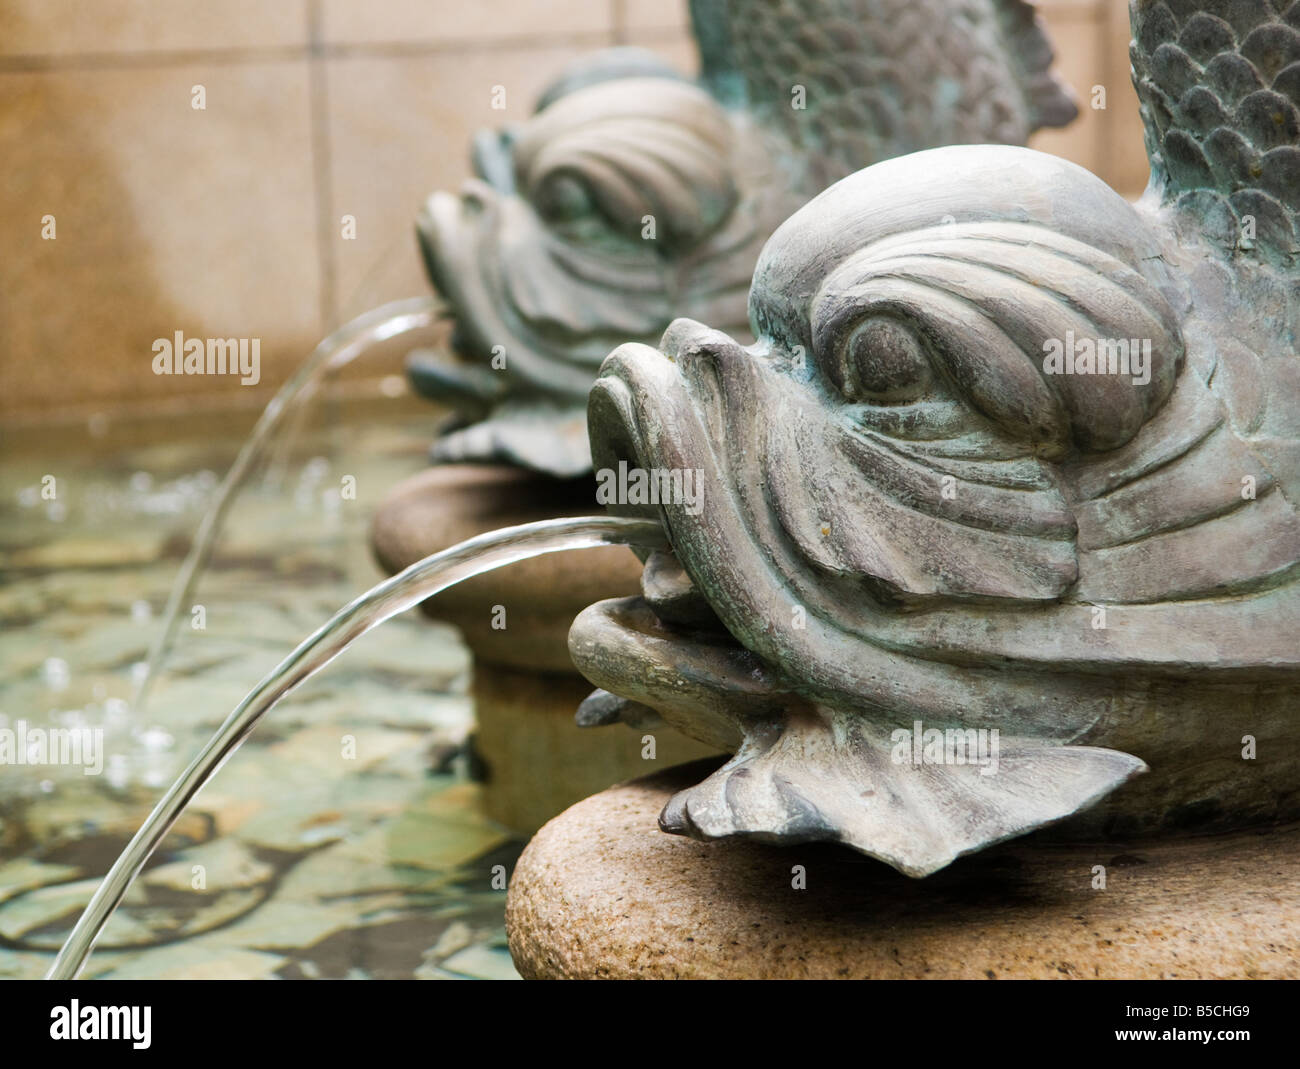 'Bronze carp fish fountains spray water into an ornate pond in a public courtyard in Hong Kong.' Stock Photo